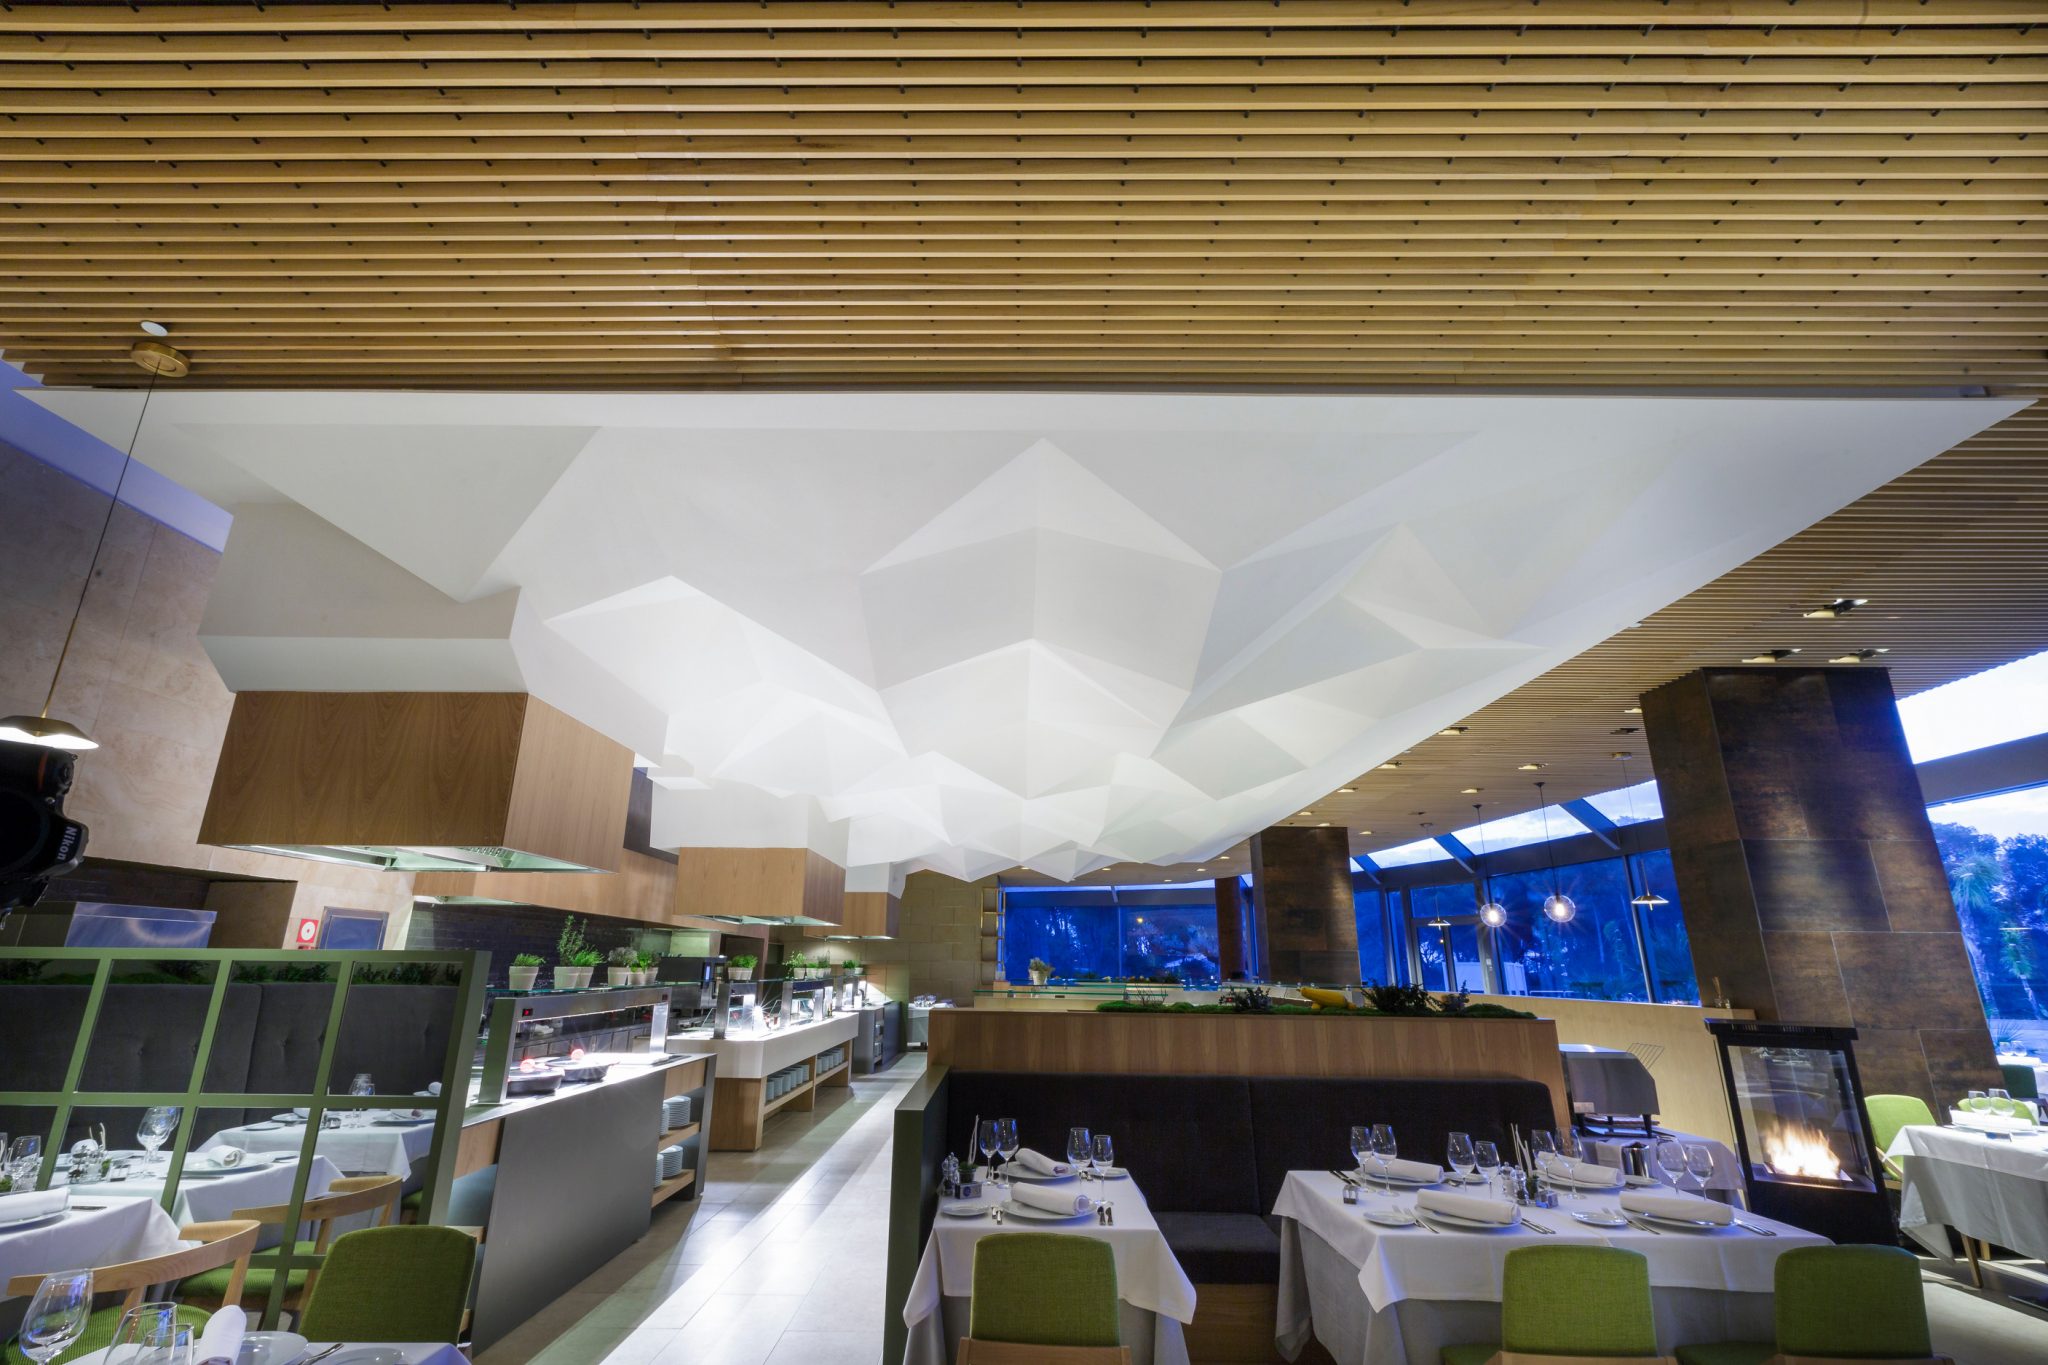 Rockfon delivers geometric flexibility with outstanding acoustics